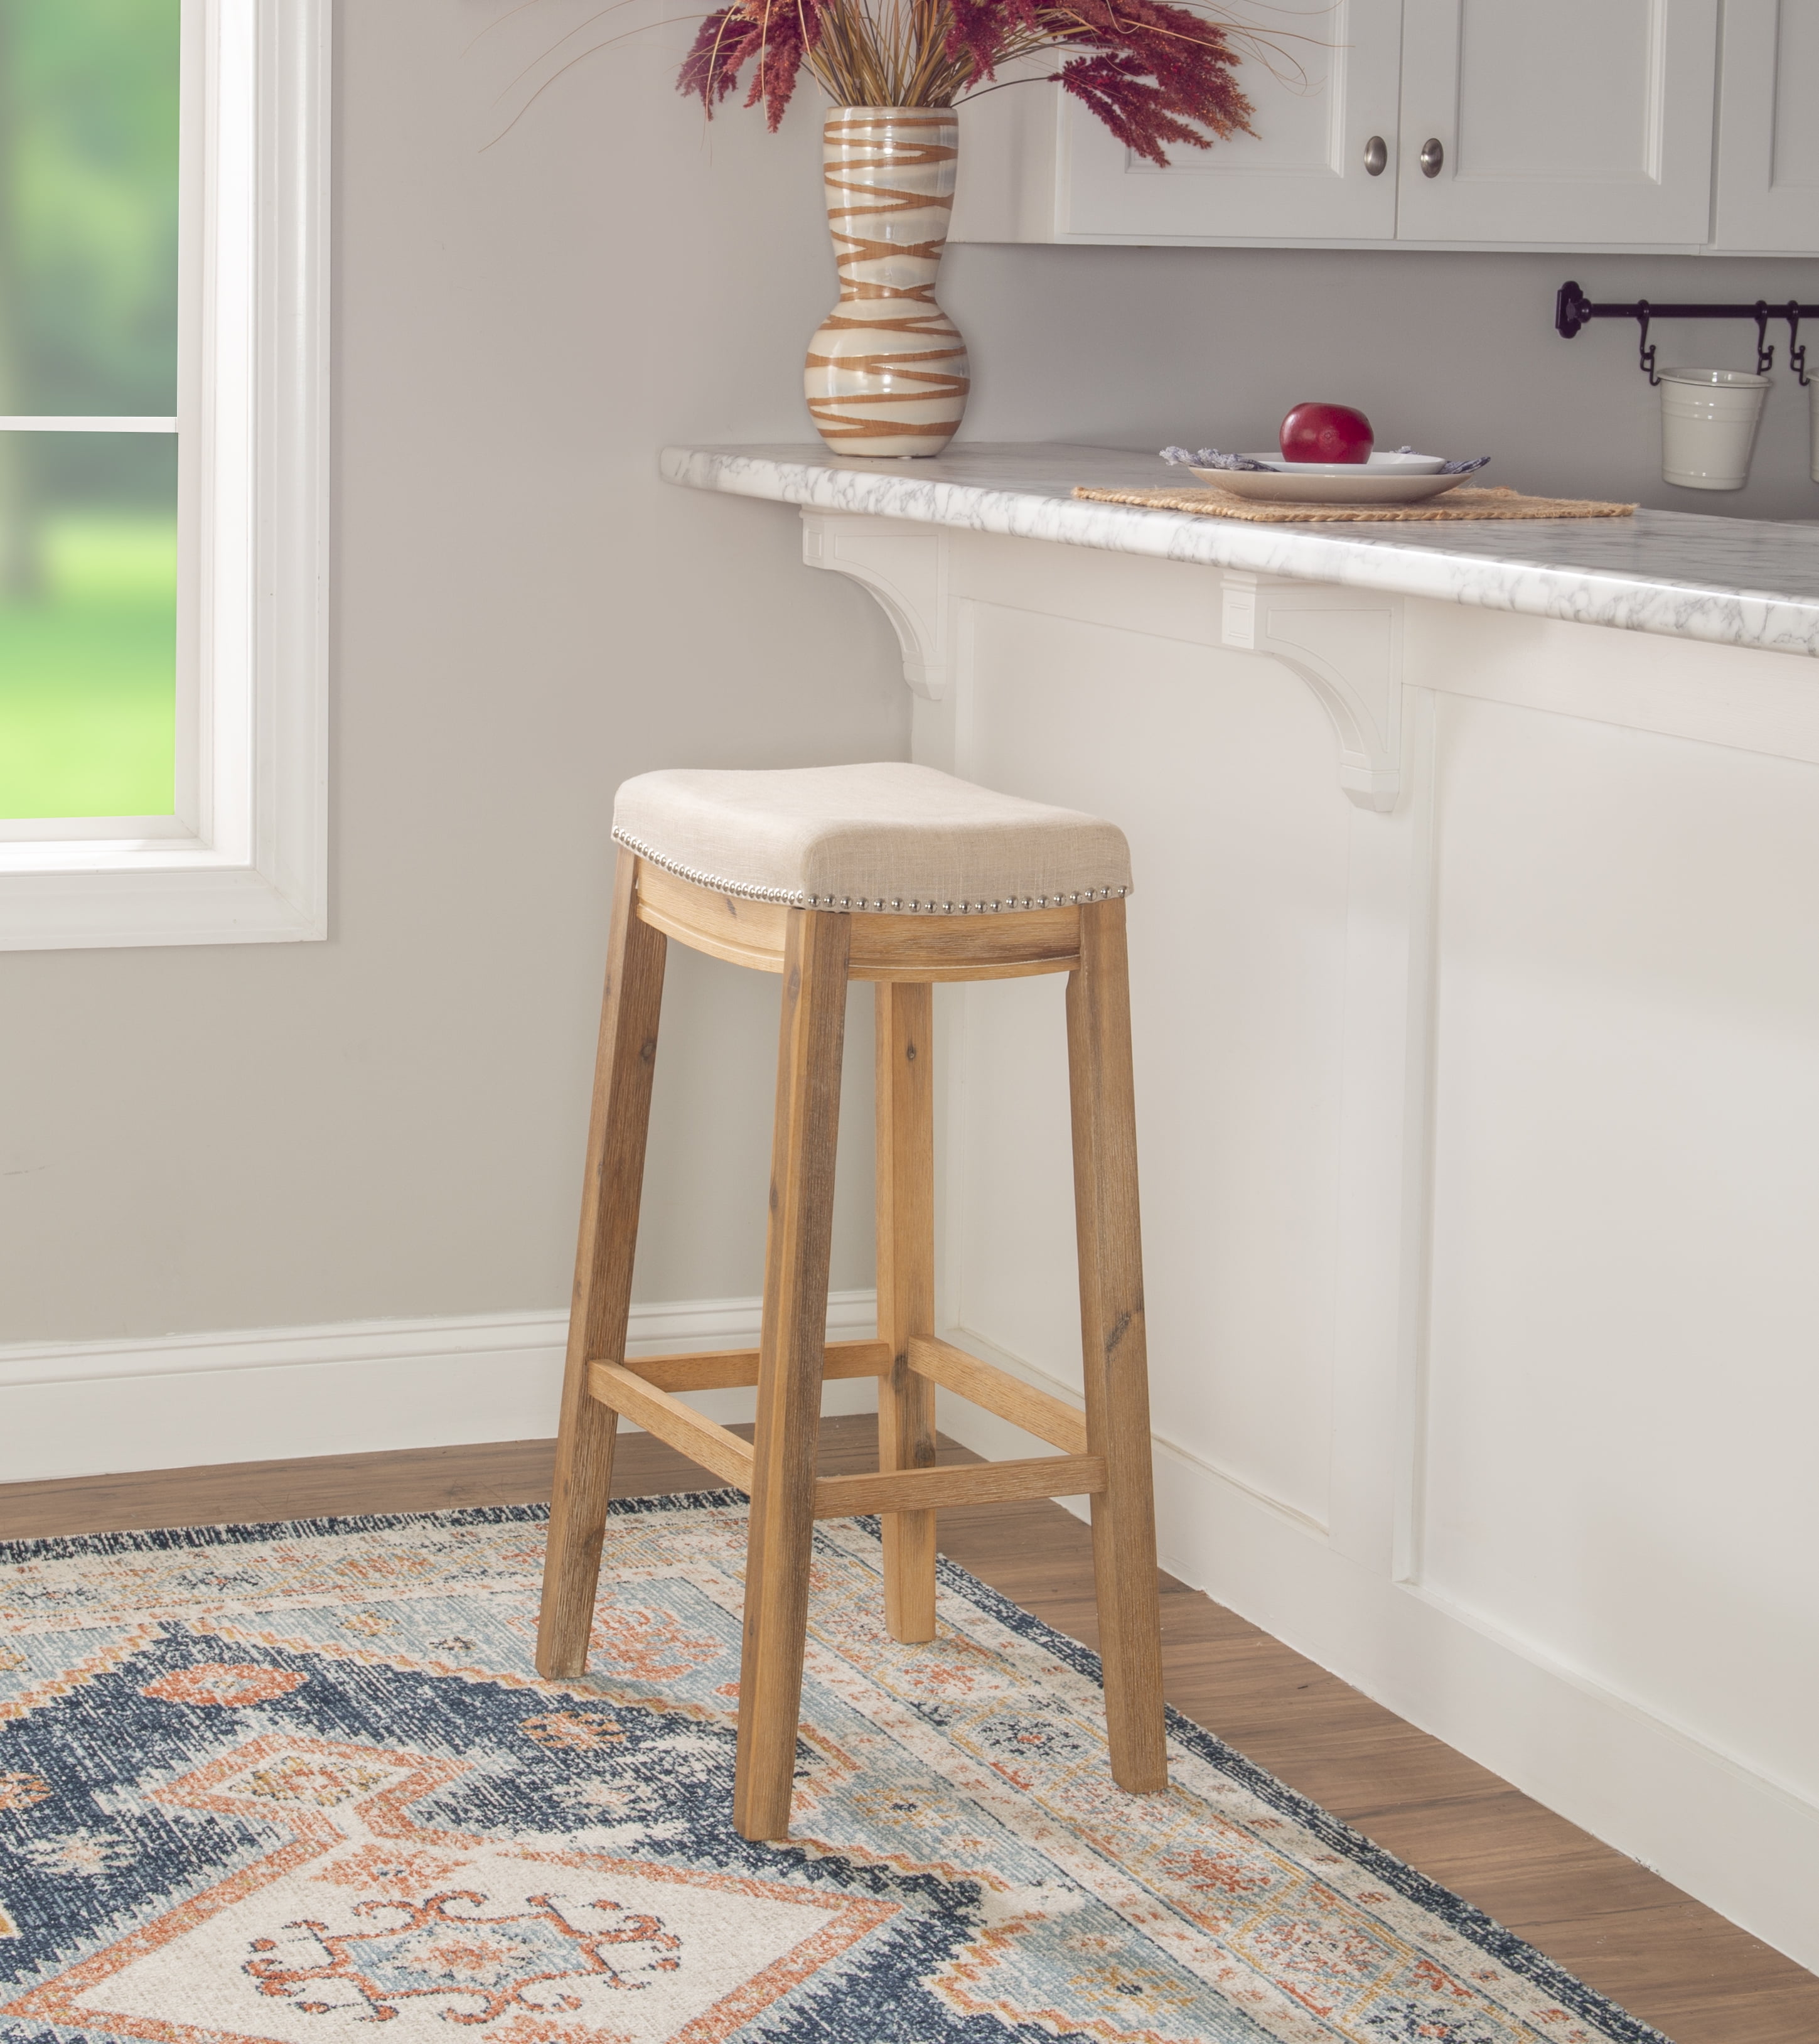 Linon Claridge 32 Backless Wood Bar Stool, Rich Brown with Natural Linen  Fabric, Includes 1 Stool